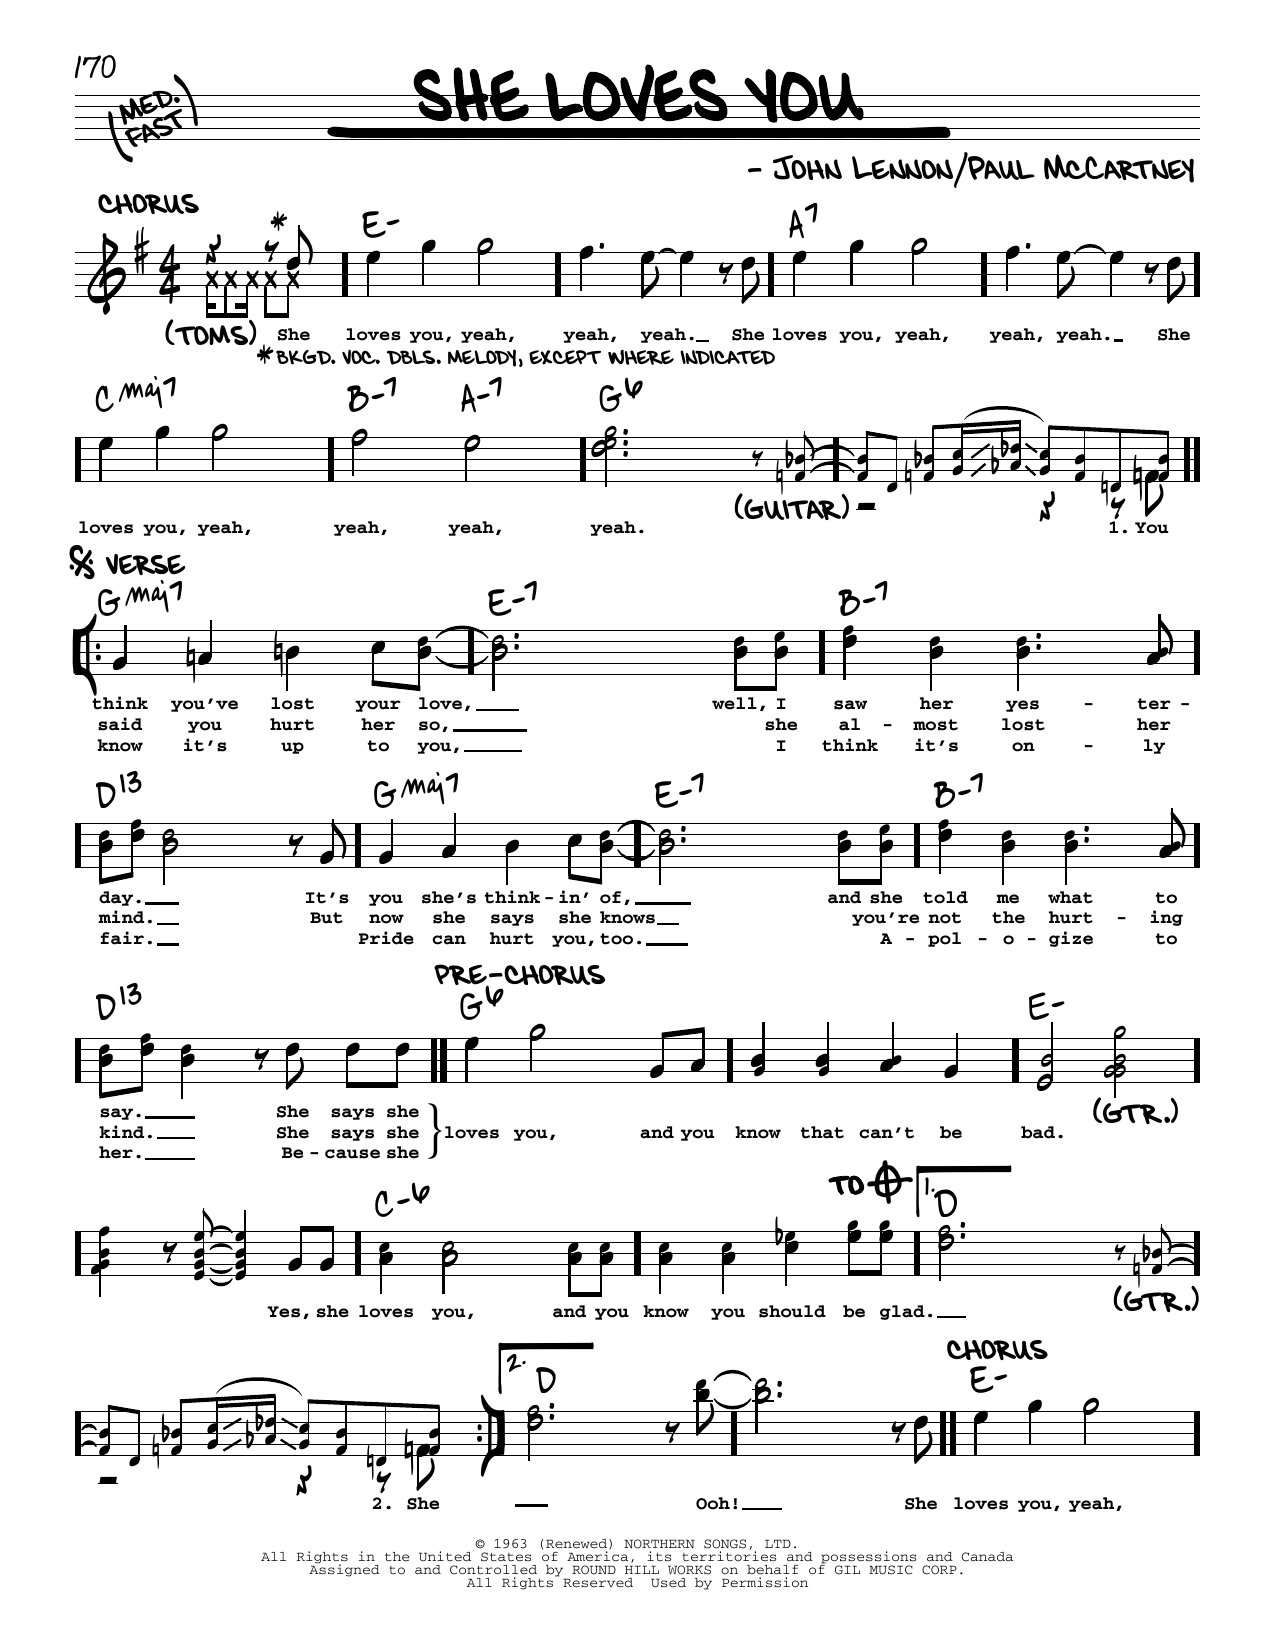 Download The Beatles She Loves You [Jazz version] Sheet Music